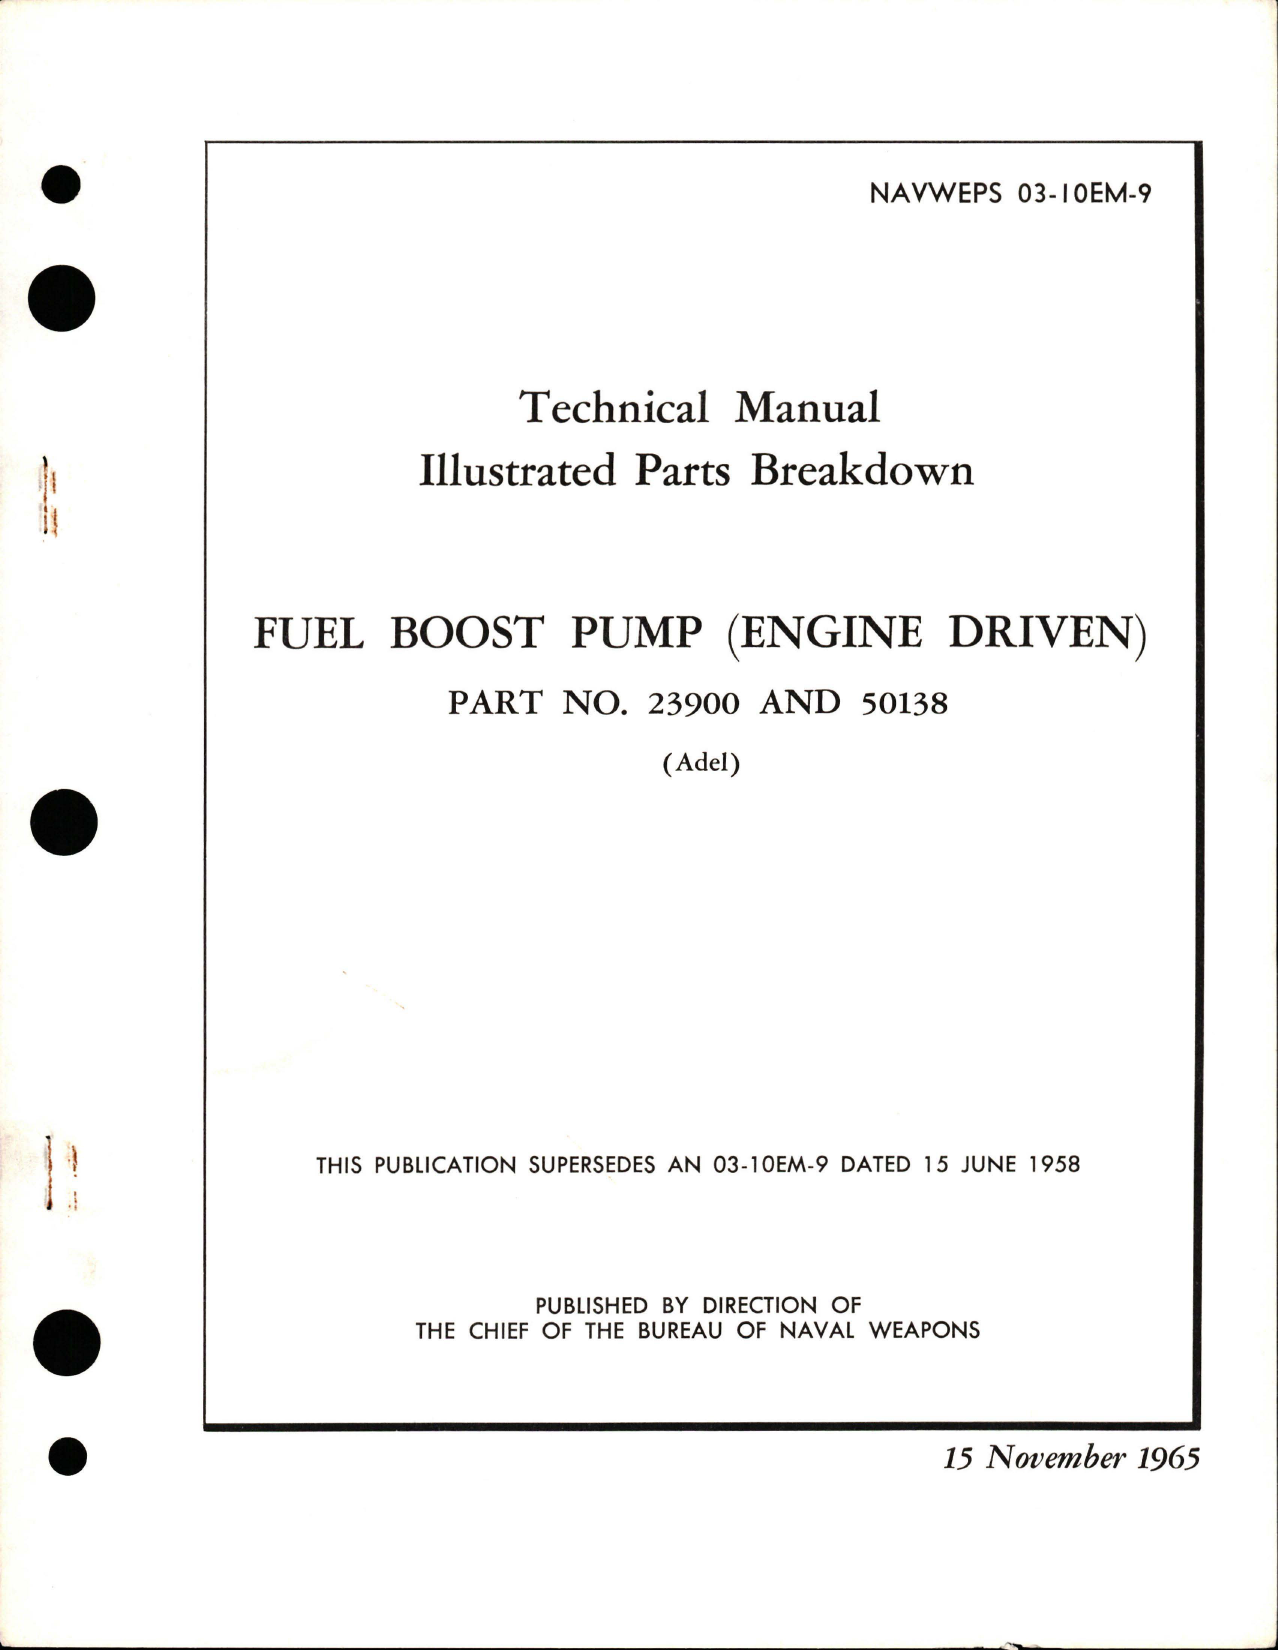 Sample page 1 from AirCorps Library document: Illustrated Parts Breakdown for Fuel Boost Pump (Engine Driven) - Part 23900 and 50138 